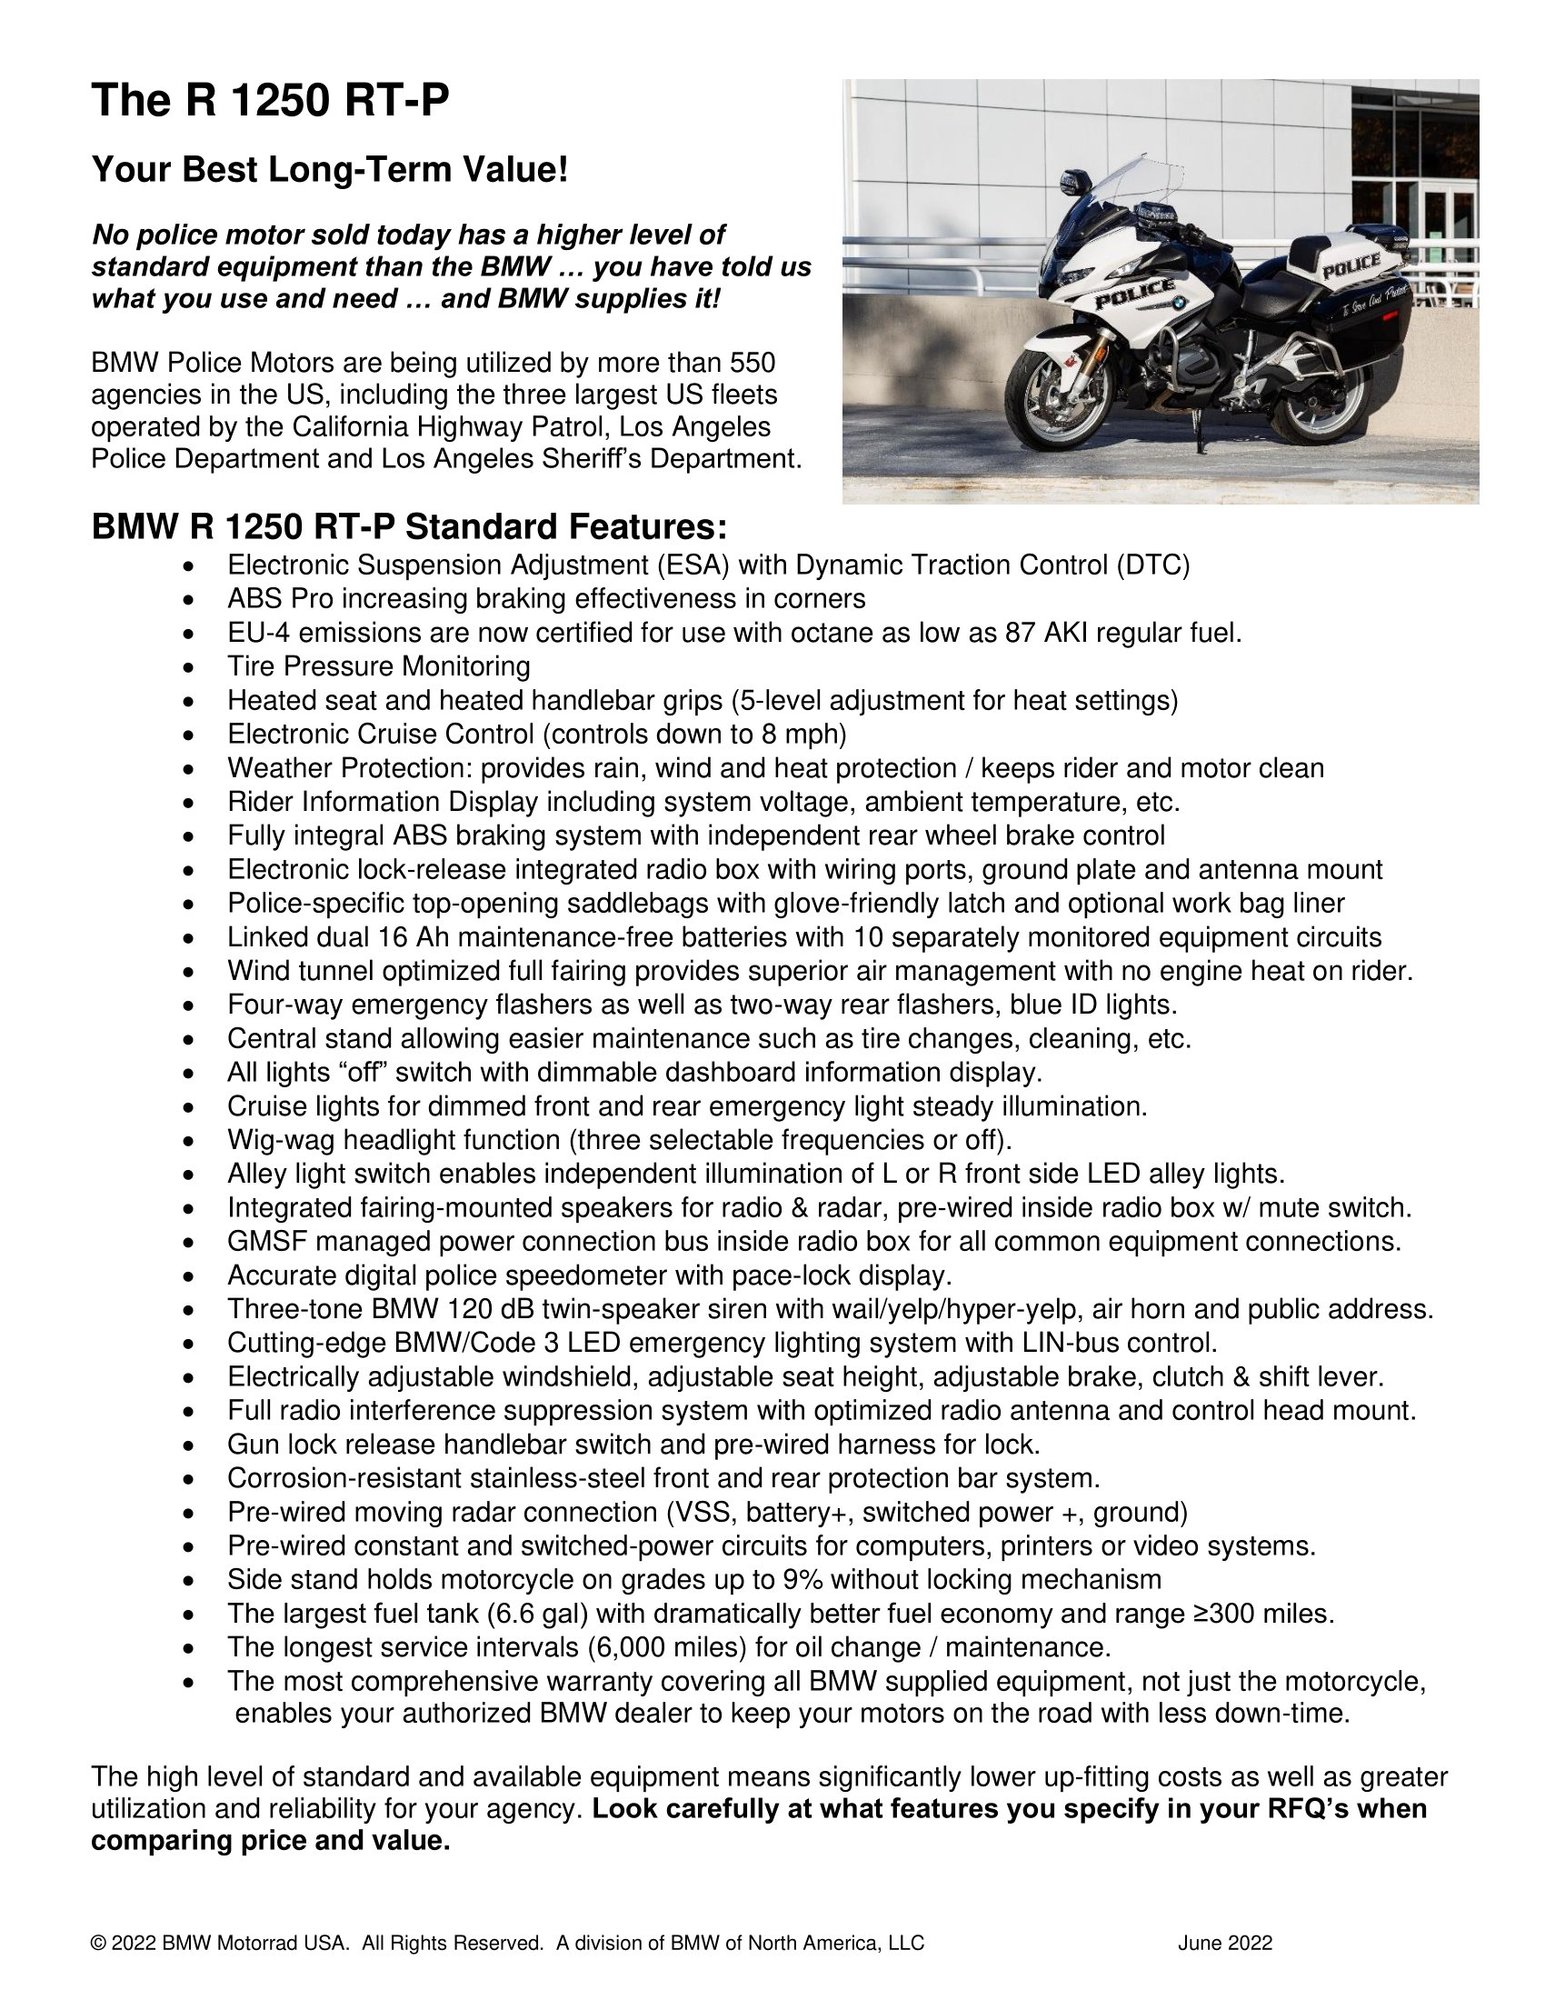 The R 1250 RT-P page 2